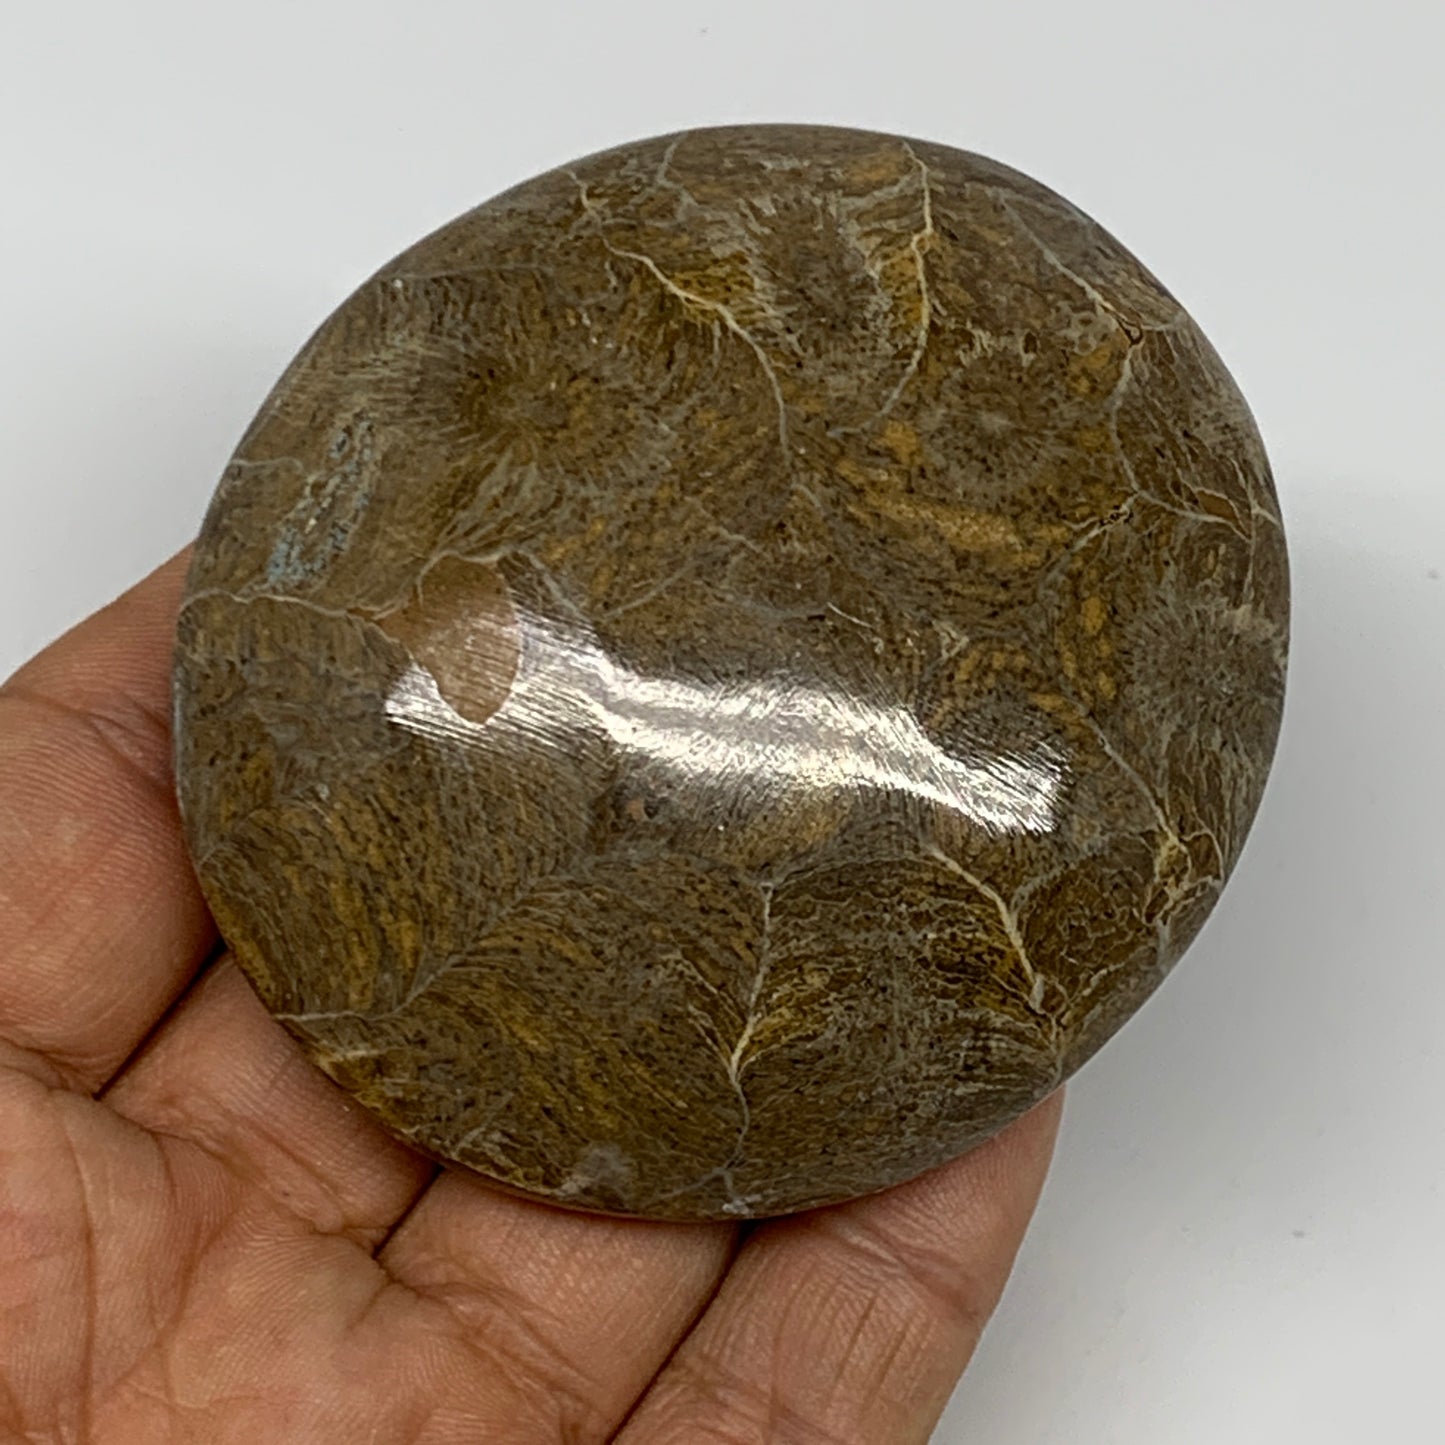 132.1g,2.7"x2.5"x 1", Coral Fossils Palm-Stone Polished from Morocco, B20345